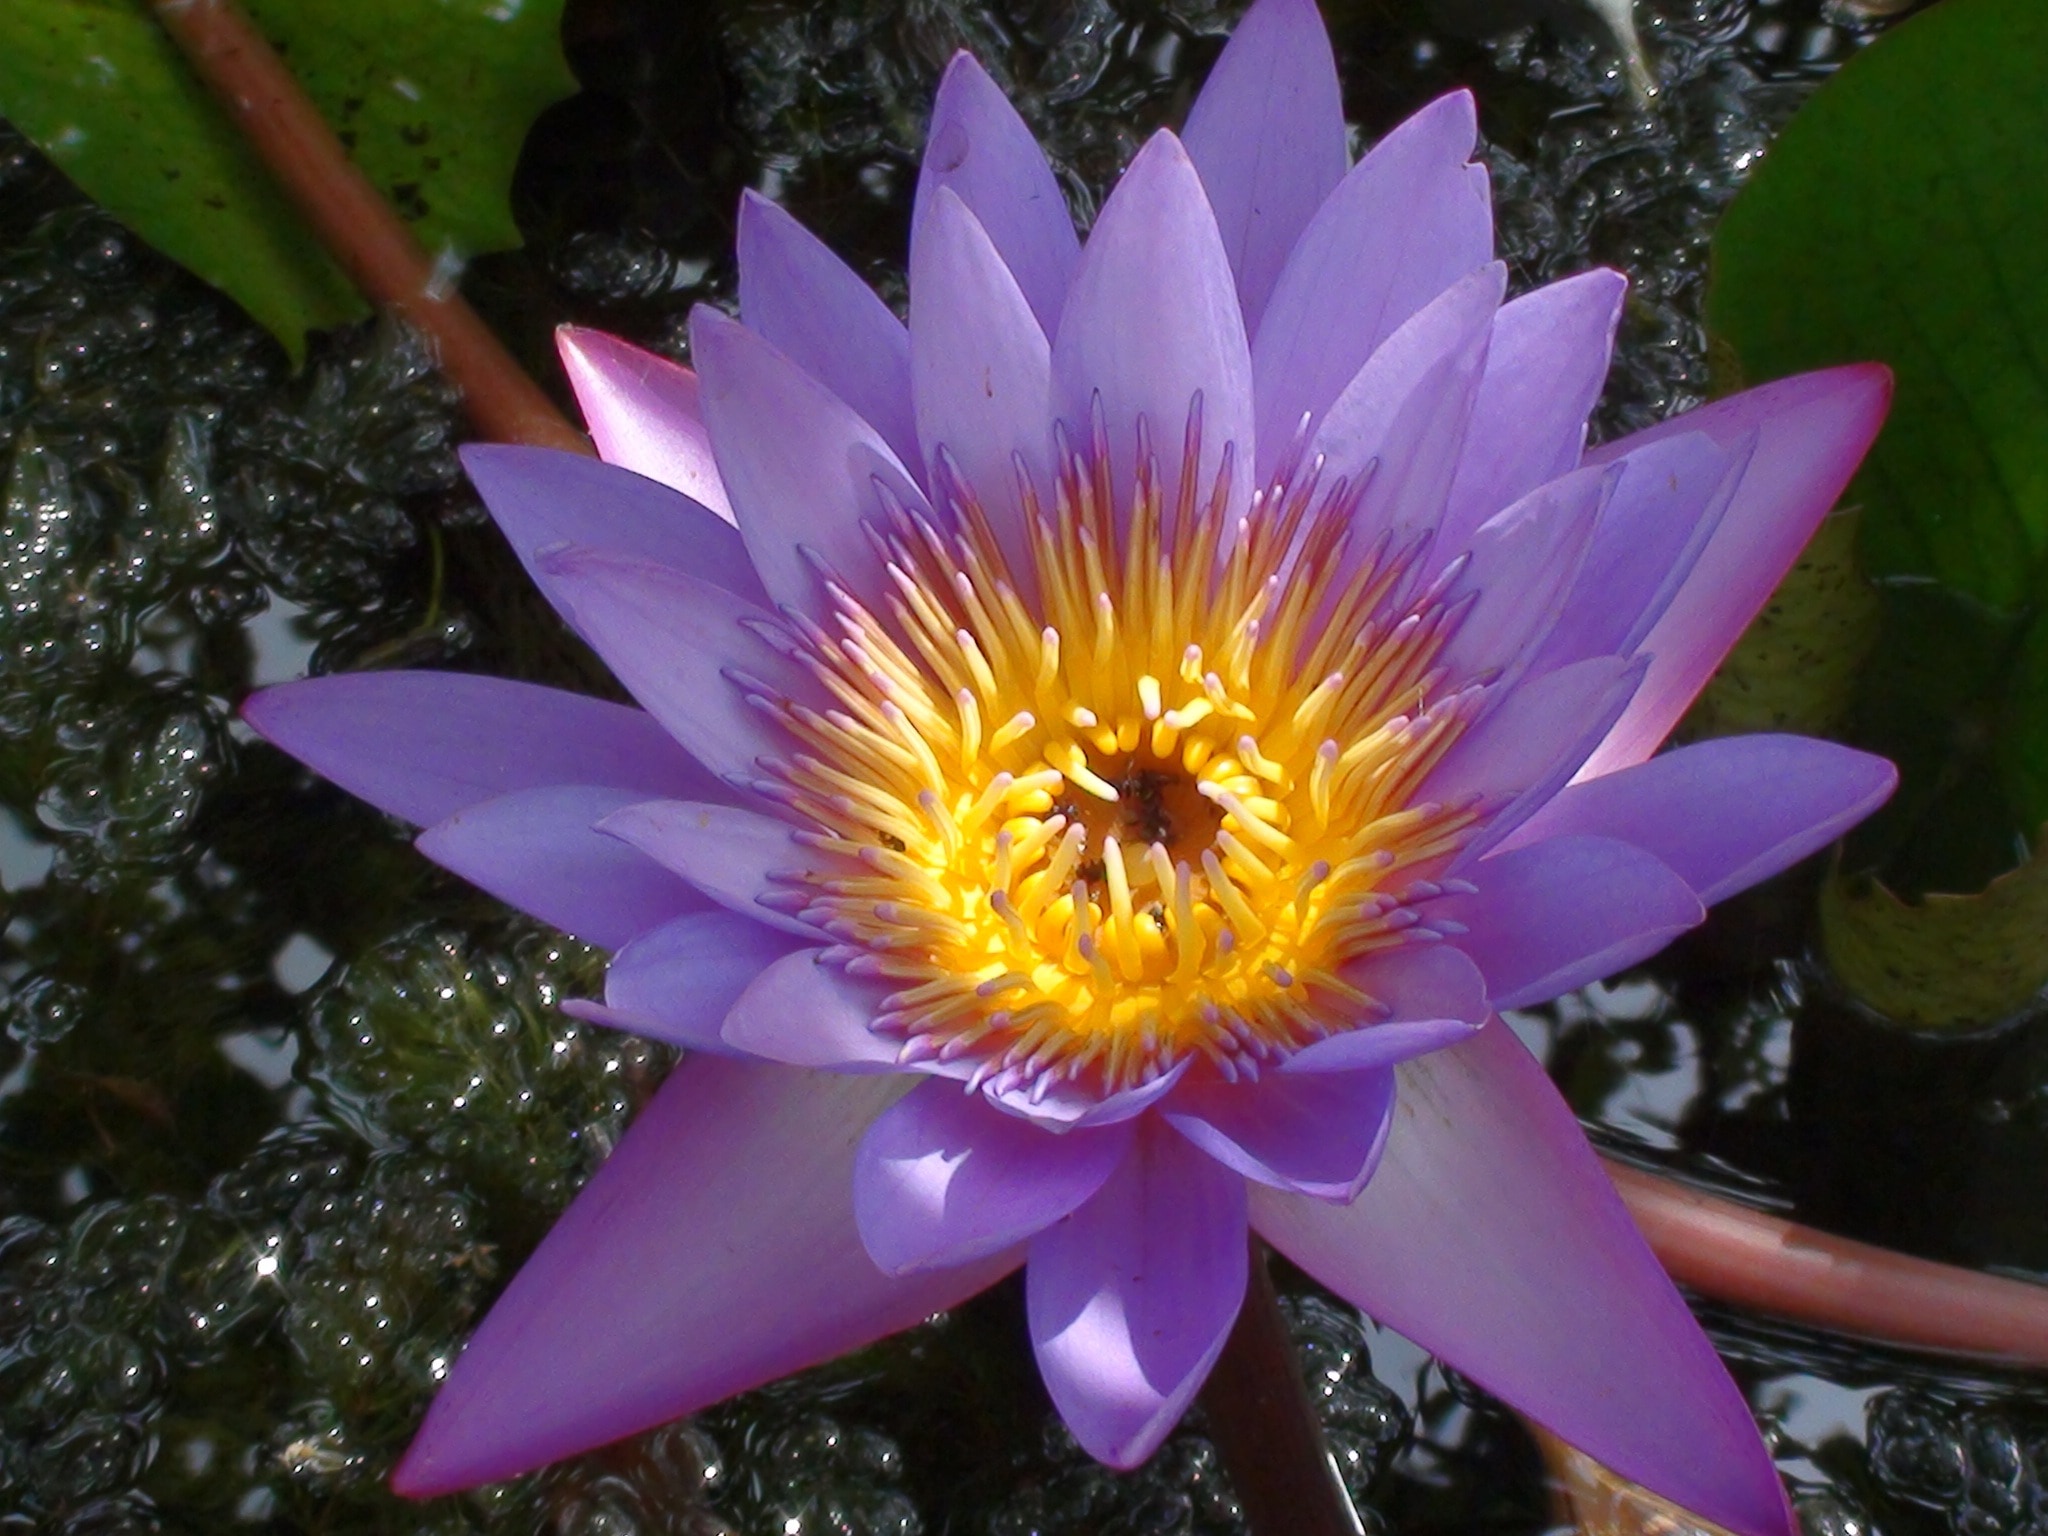 purple and yellow flower on body of water